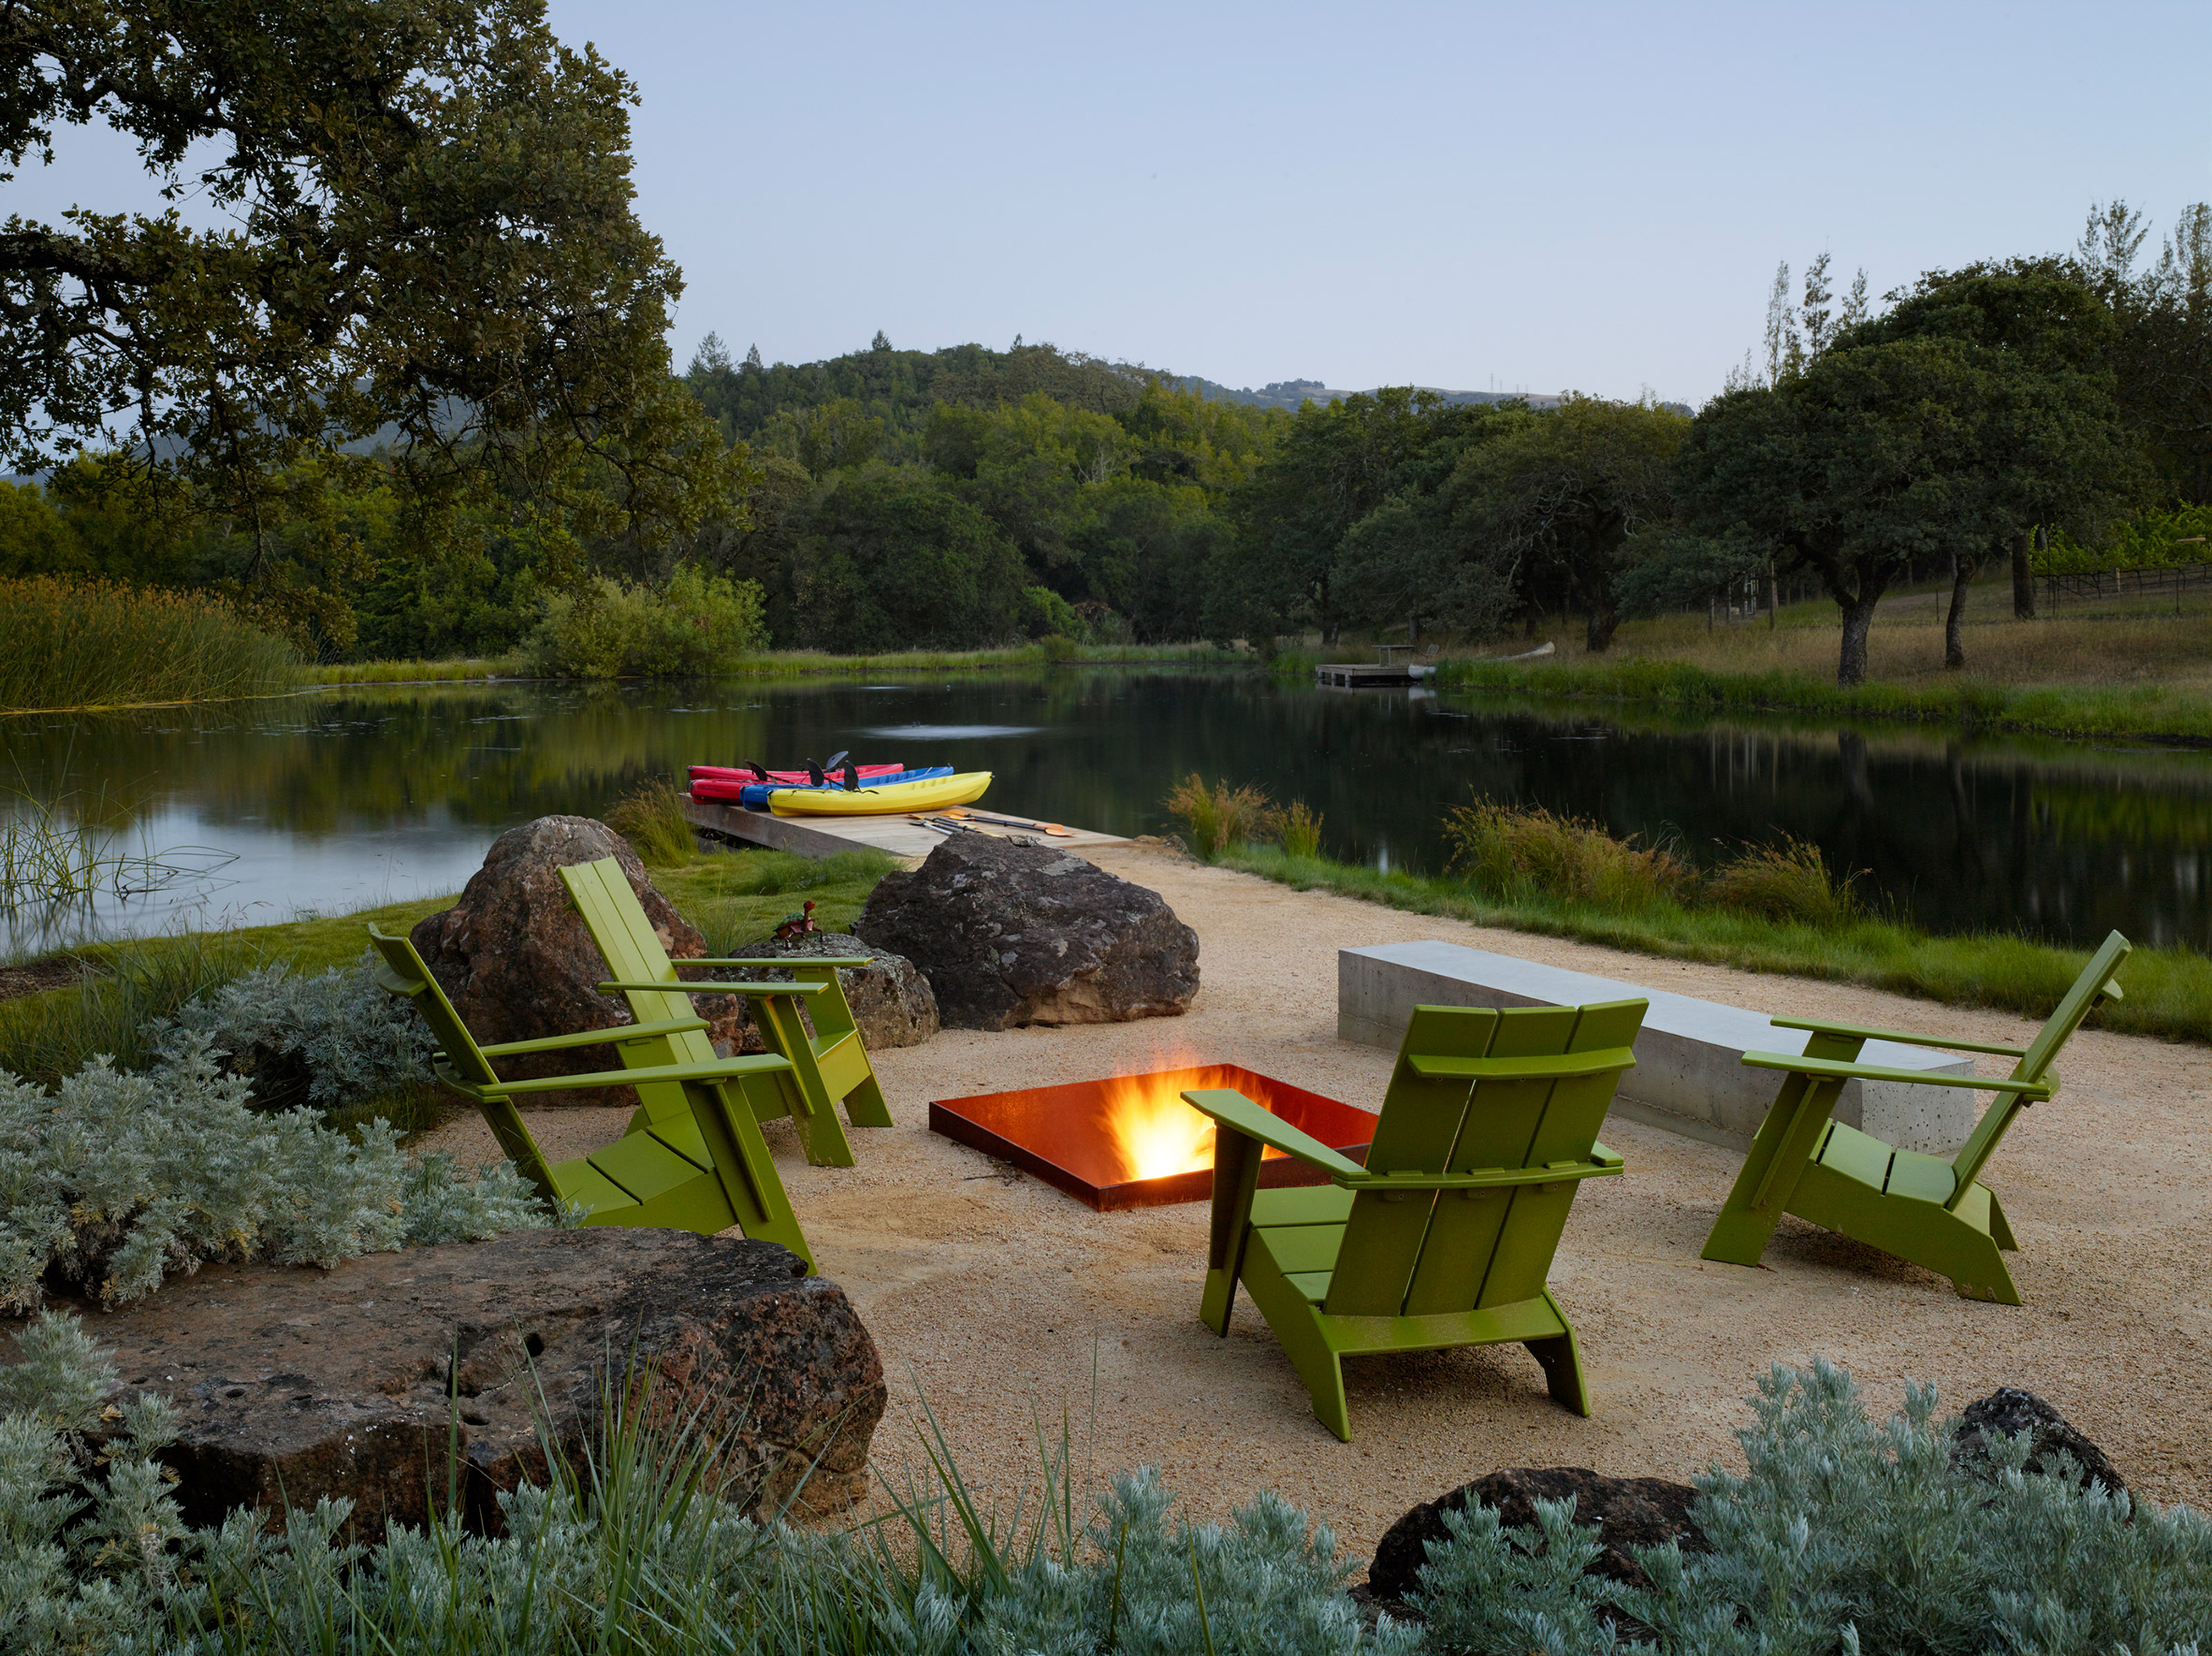 There's a fire pit, lounge chairs and a kayak station